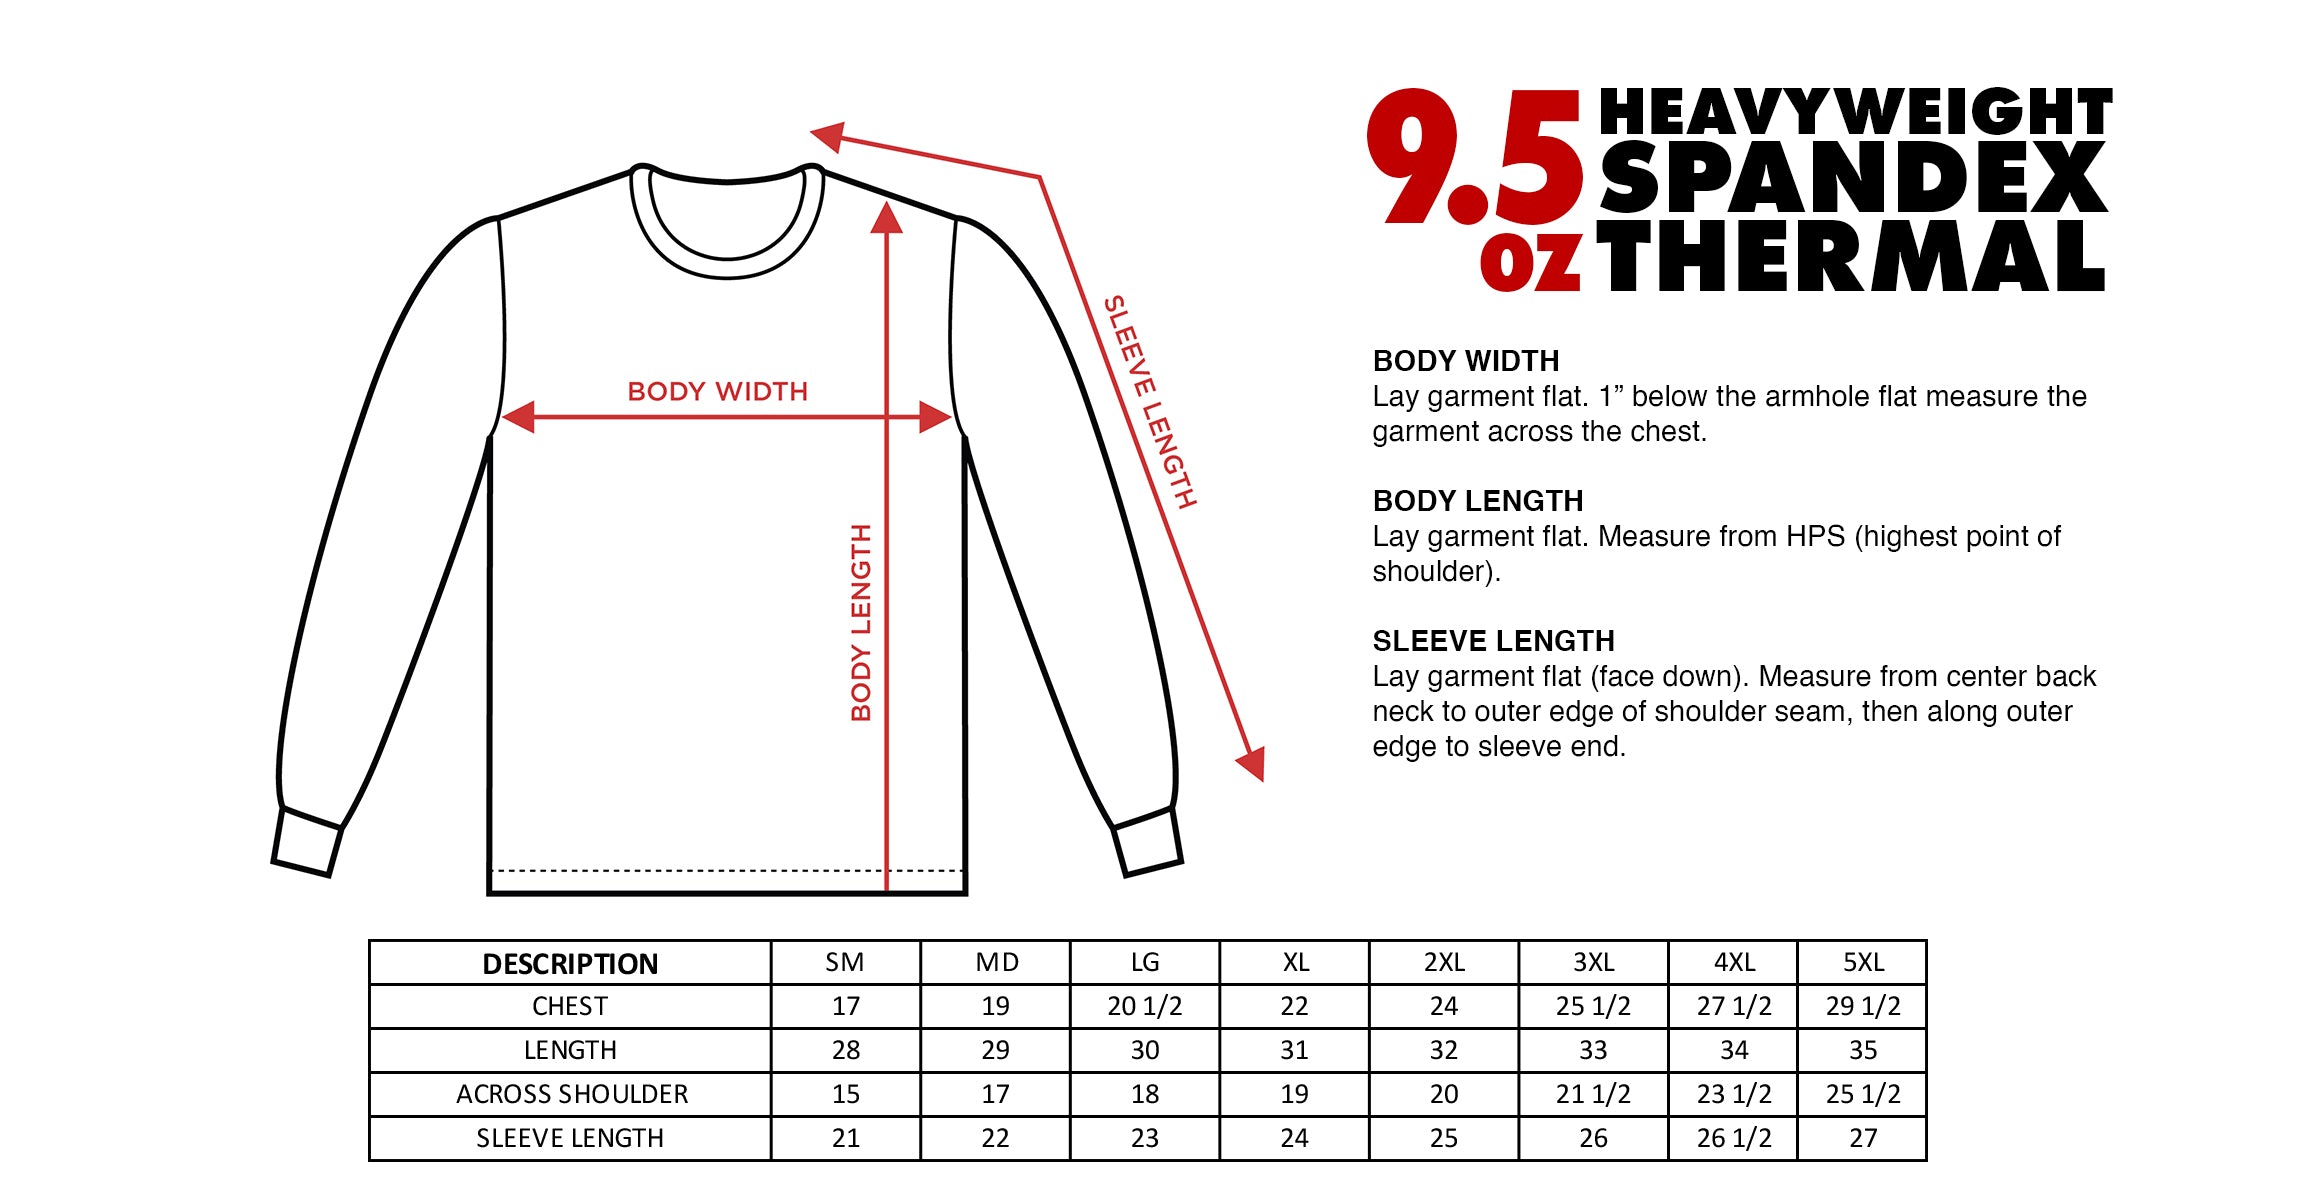 Bodycare Thermal Size Chart